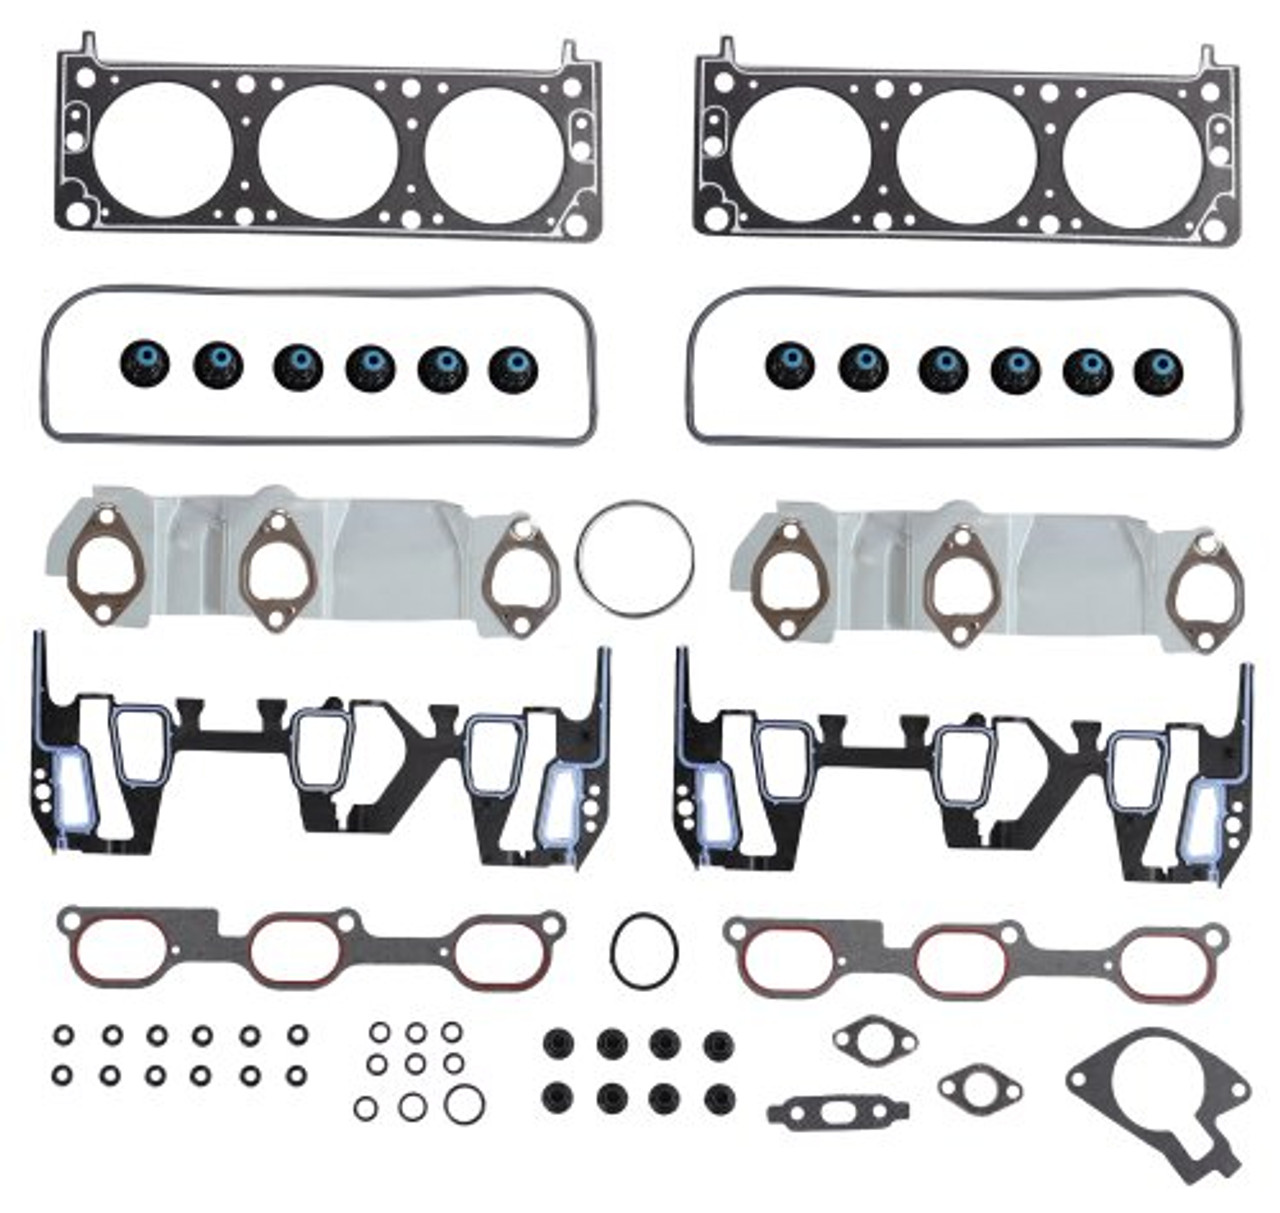 Head Gasket Set with Head Bolt Kit - 2001 Oldsmobile Silhouette 3.4L Engine Parts # HGB31181ZE12